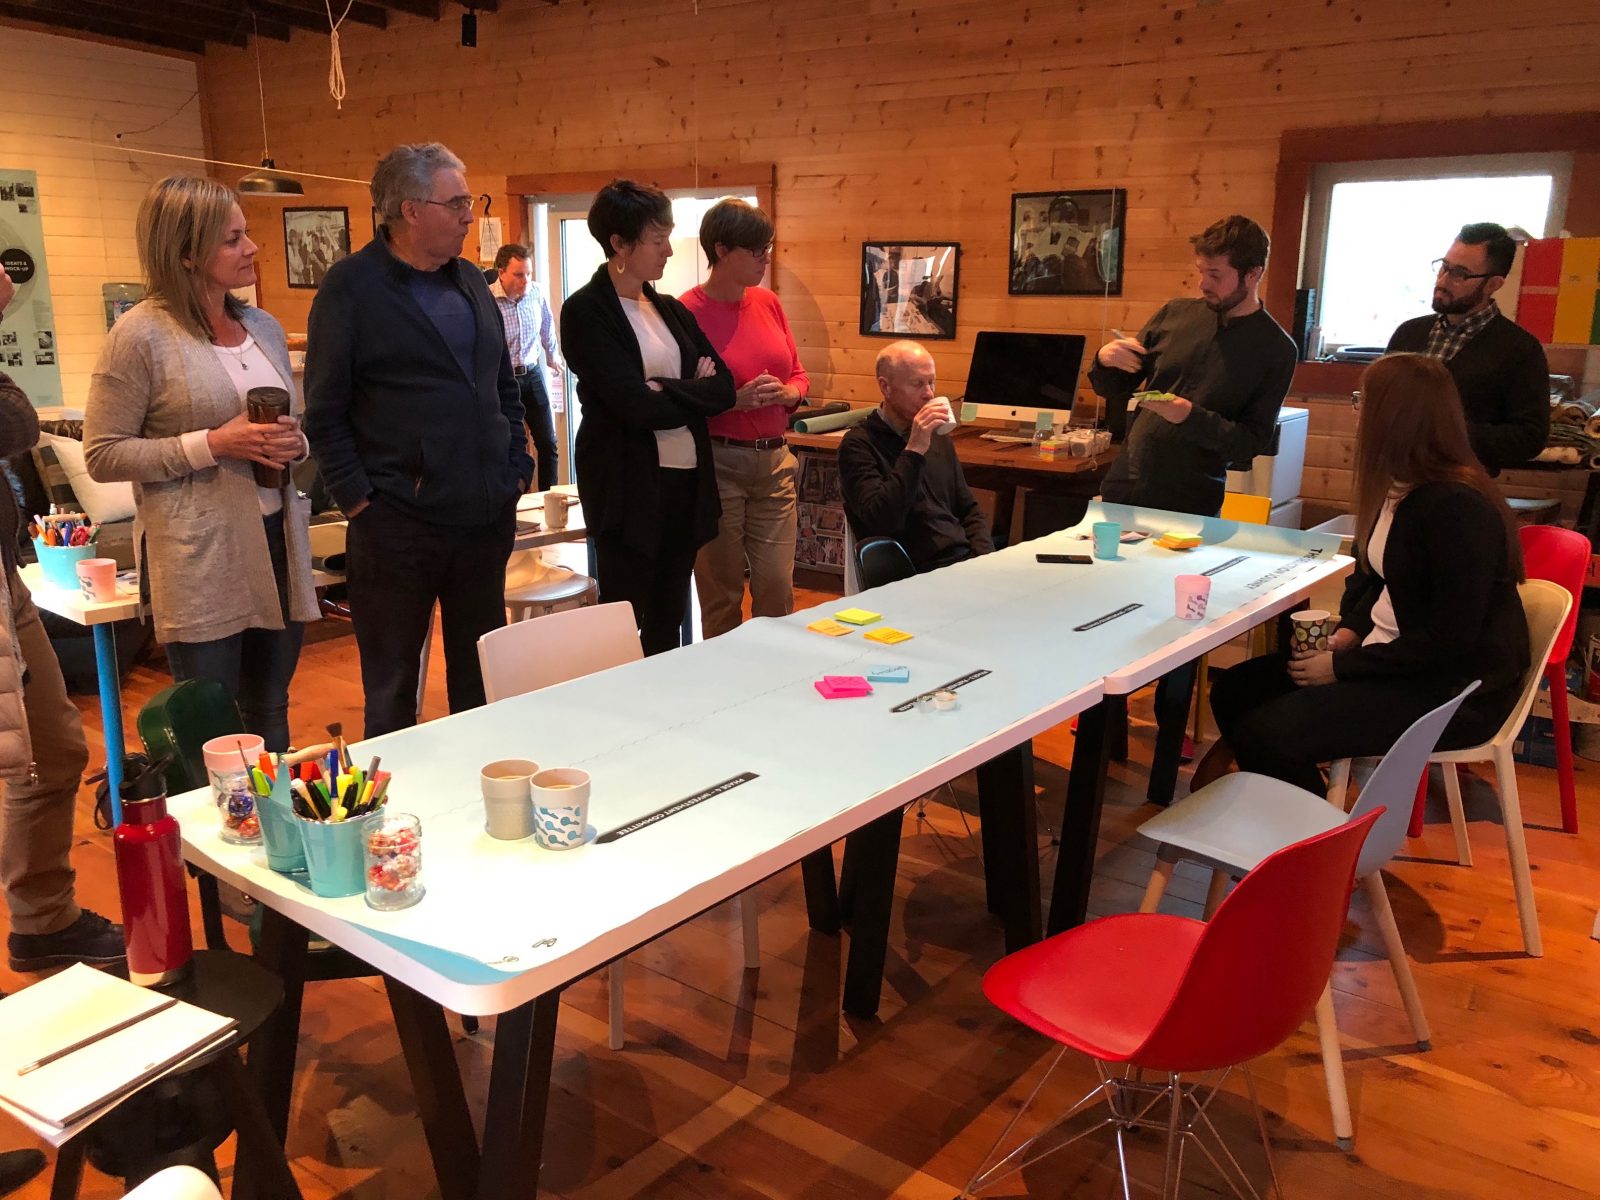 Eight adults sit and stand around a long table laid out with paper, post-its and pens.